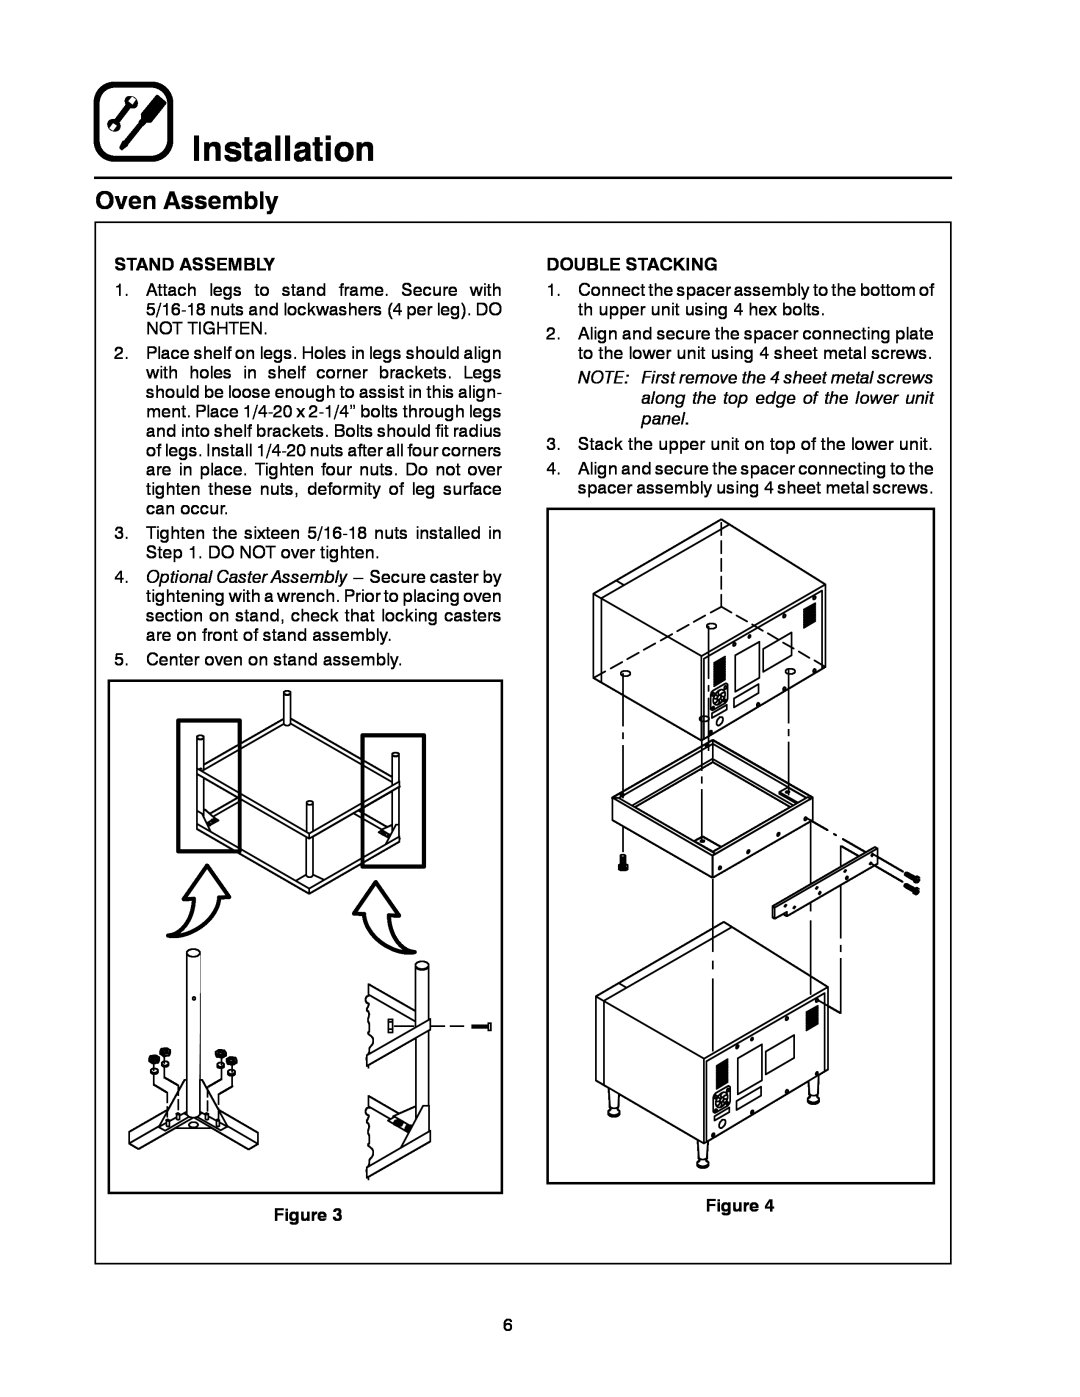 Blodgett 1415 manual Installation, Stand Assembly, Double Stacking 